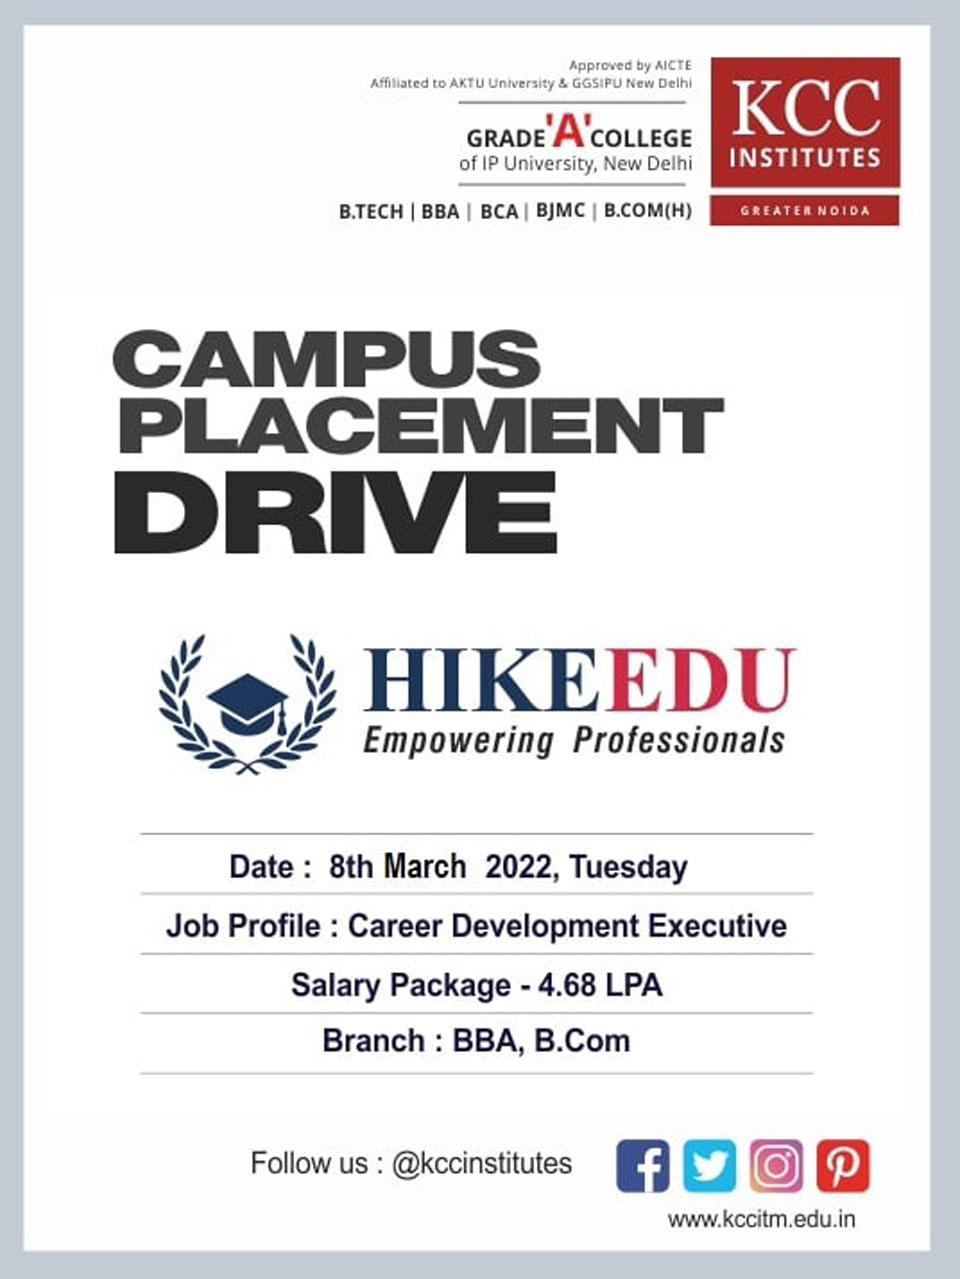 Campus Placement Drive for HIKE EDUCATION on 8th March 2022 (Tuesday).